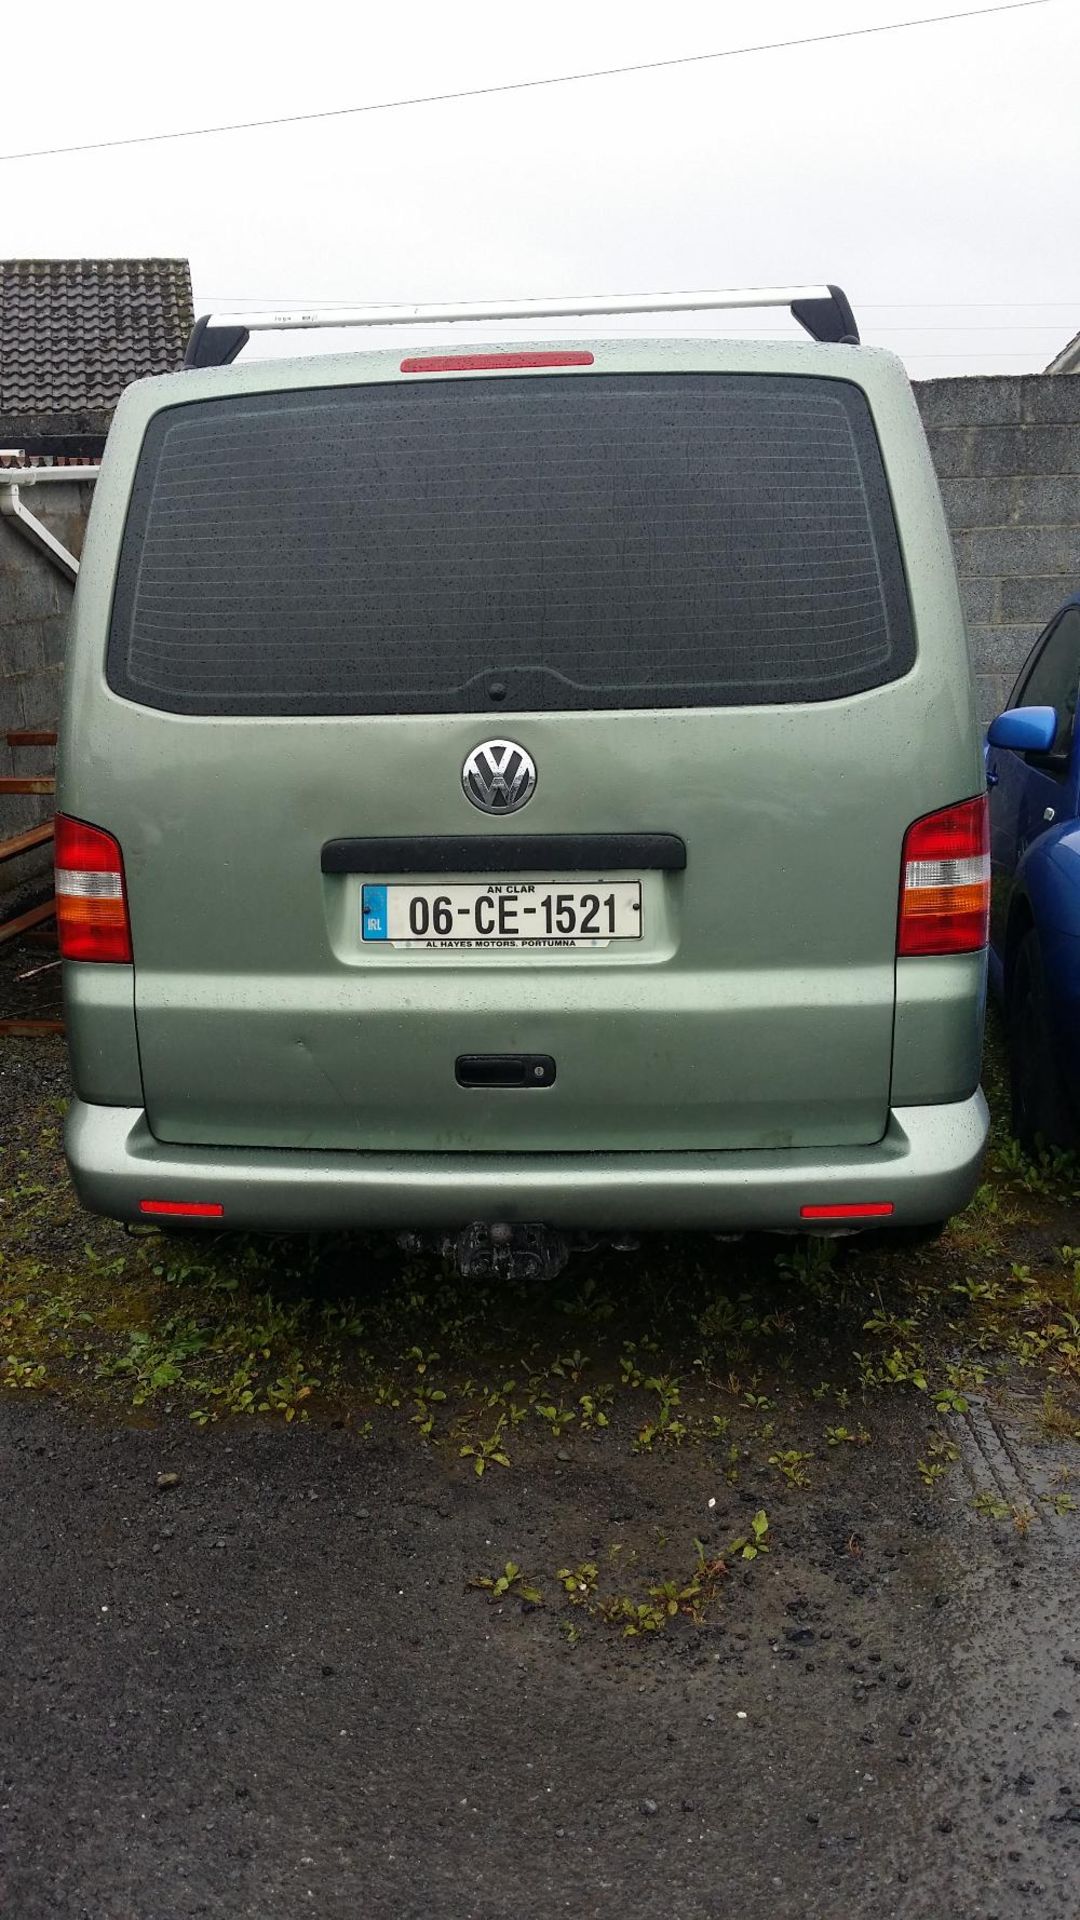 VW Transporter 2.5 TDI LWD with 4no. New Tyres, Oil Cooler, Bushings Fully Serviced. Reg Docs will - Image 3 of 3